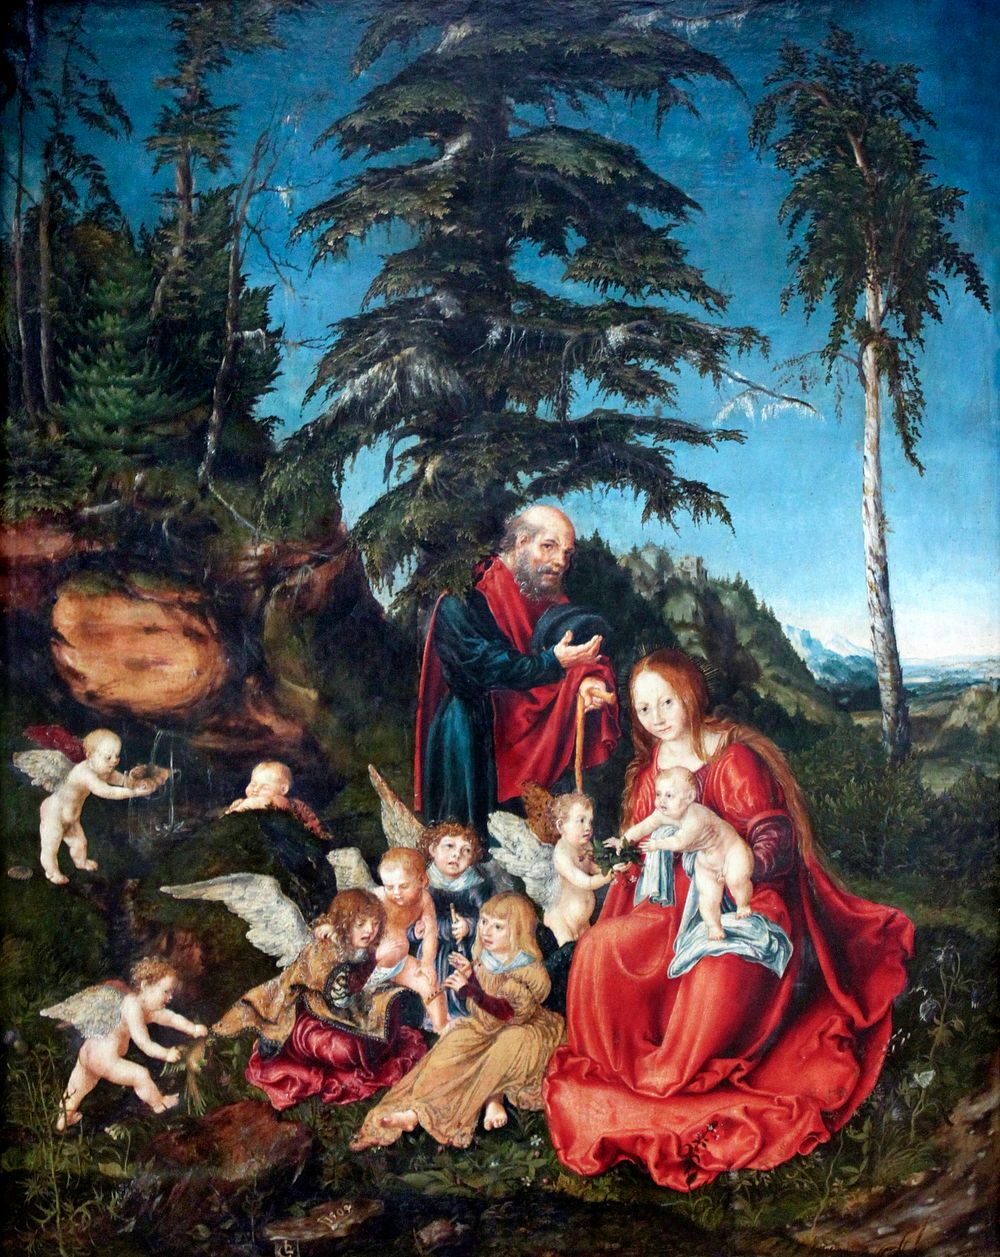 Lucas Cranach's The Rest on the Flight into Egypt (1540) famous painting. Original from Wikimedia Commons. Digitally enhaced…